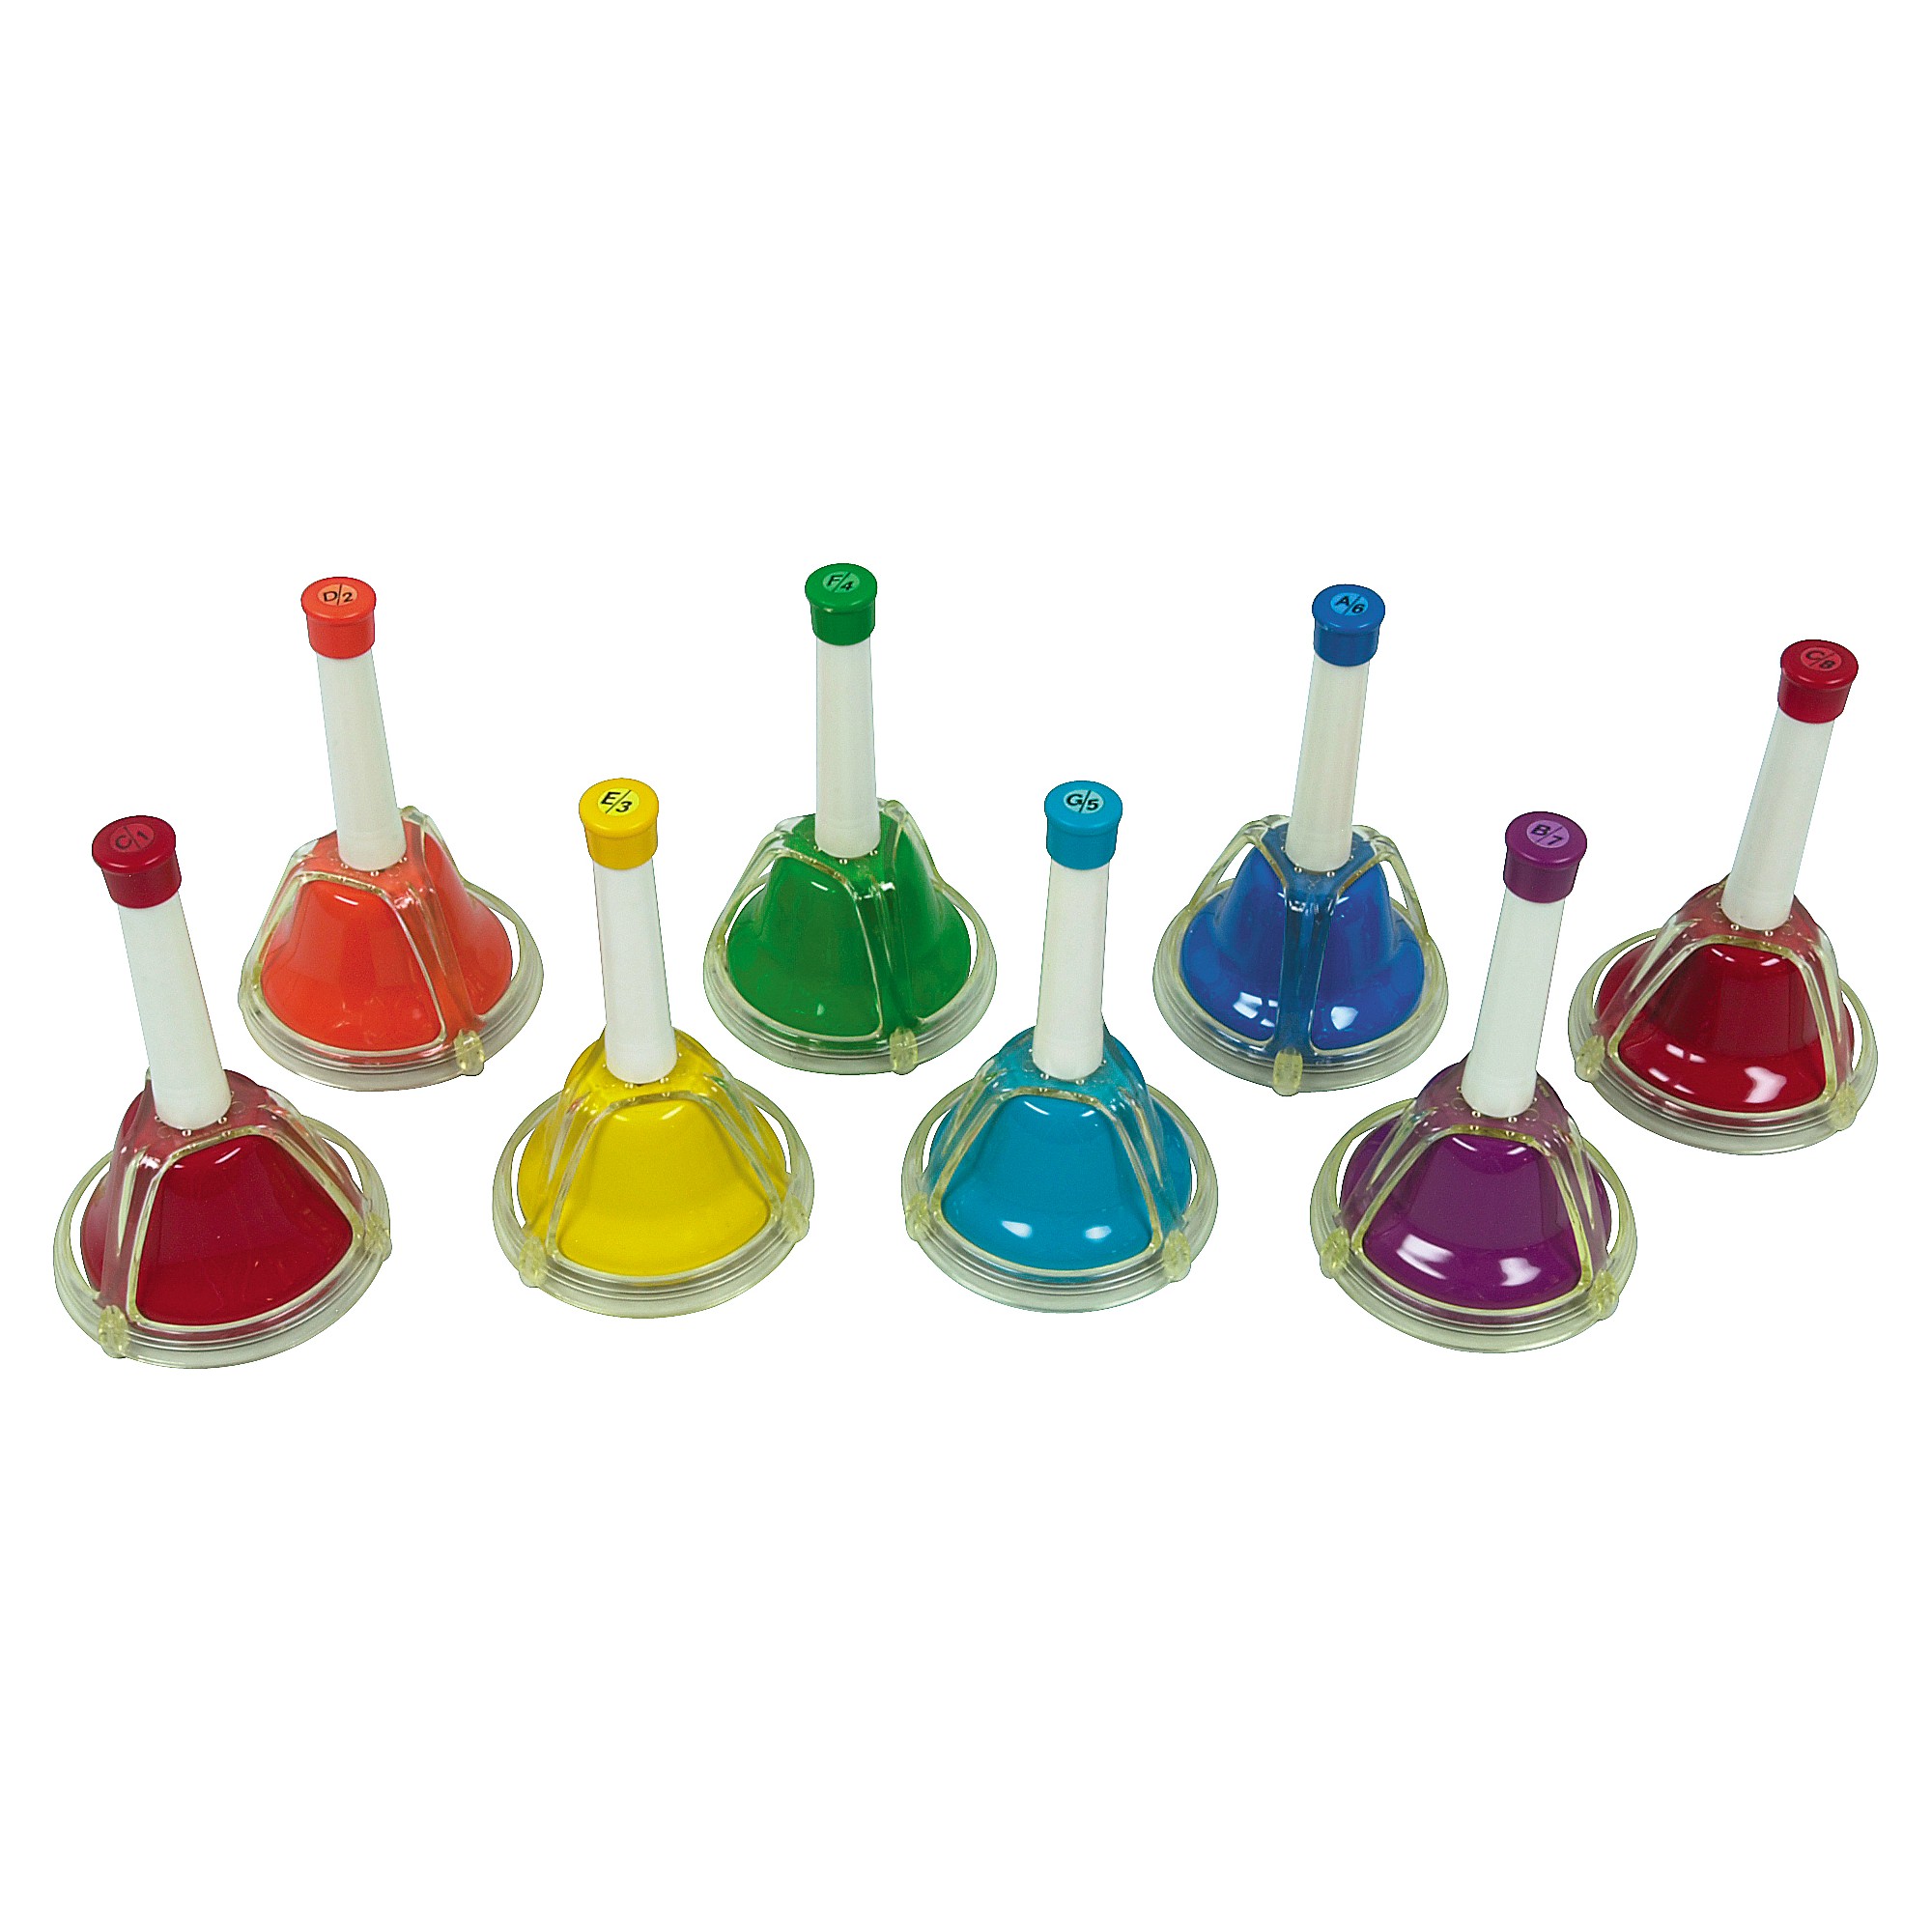  Rhythm Band 8 Note Metal Hand Bells - Set of 8 : Musical  Instruments